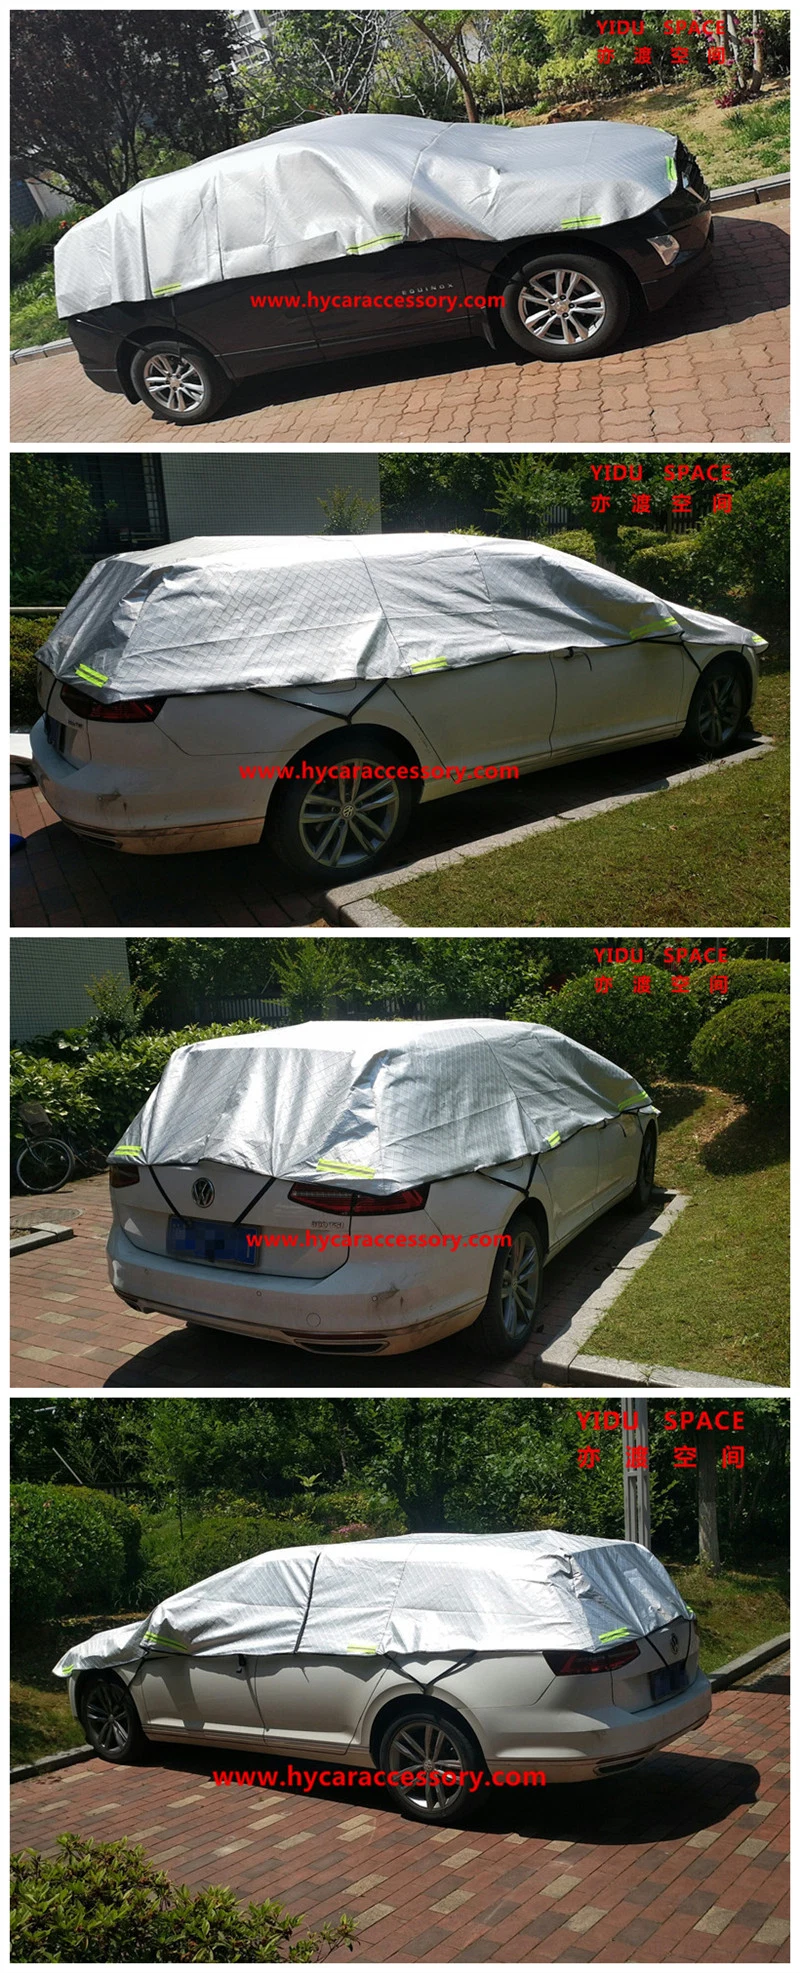 Real Hail Protection Anti Snow Anti Ice Fast Padded Auto Car Cover Picnic Outing Mat